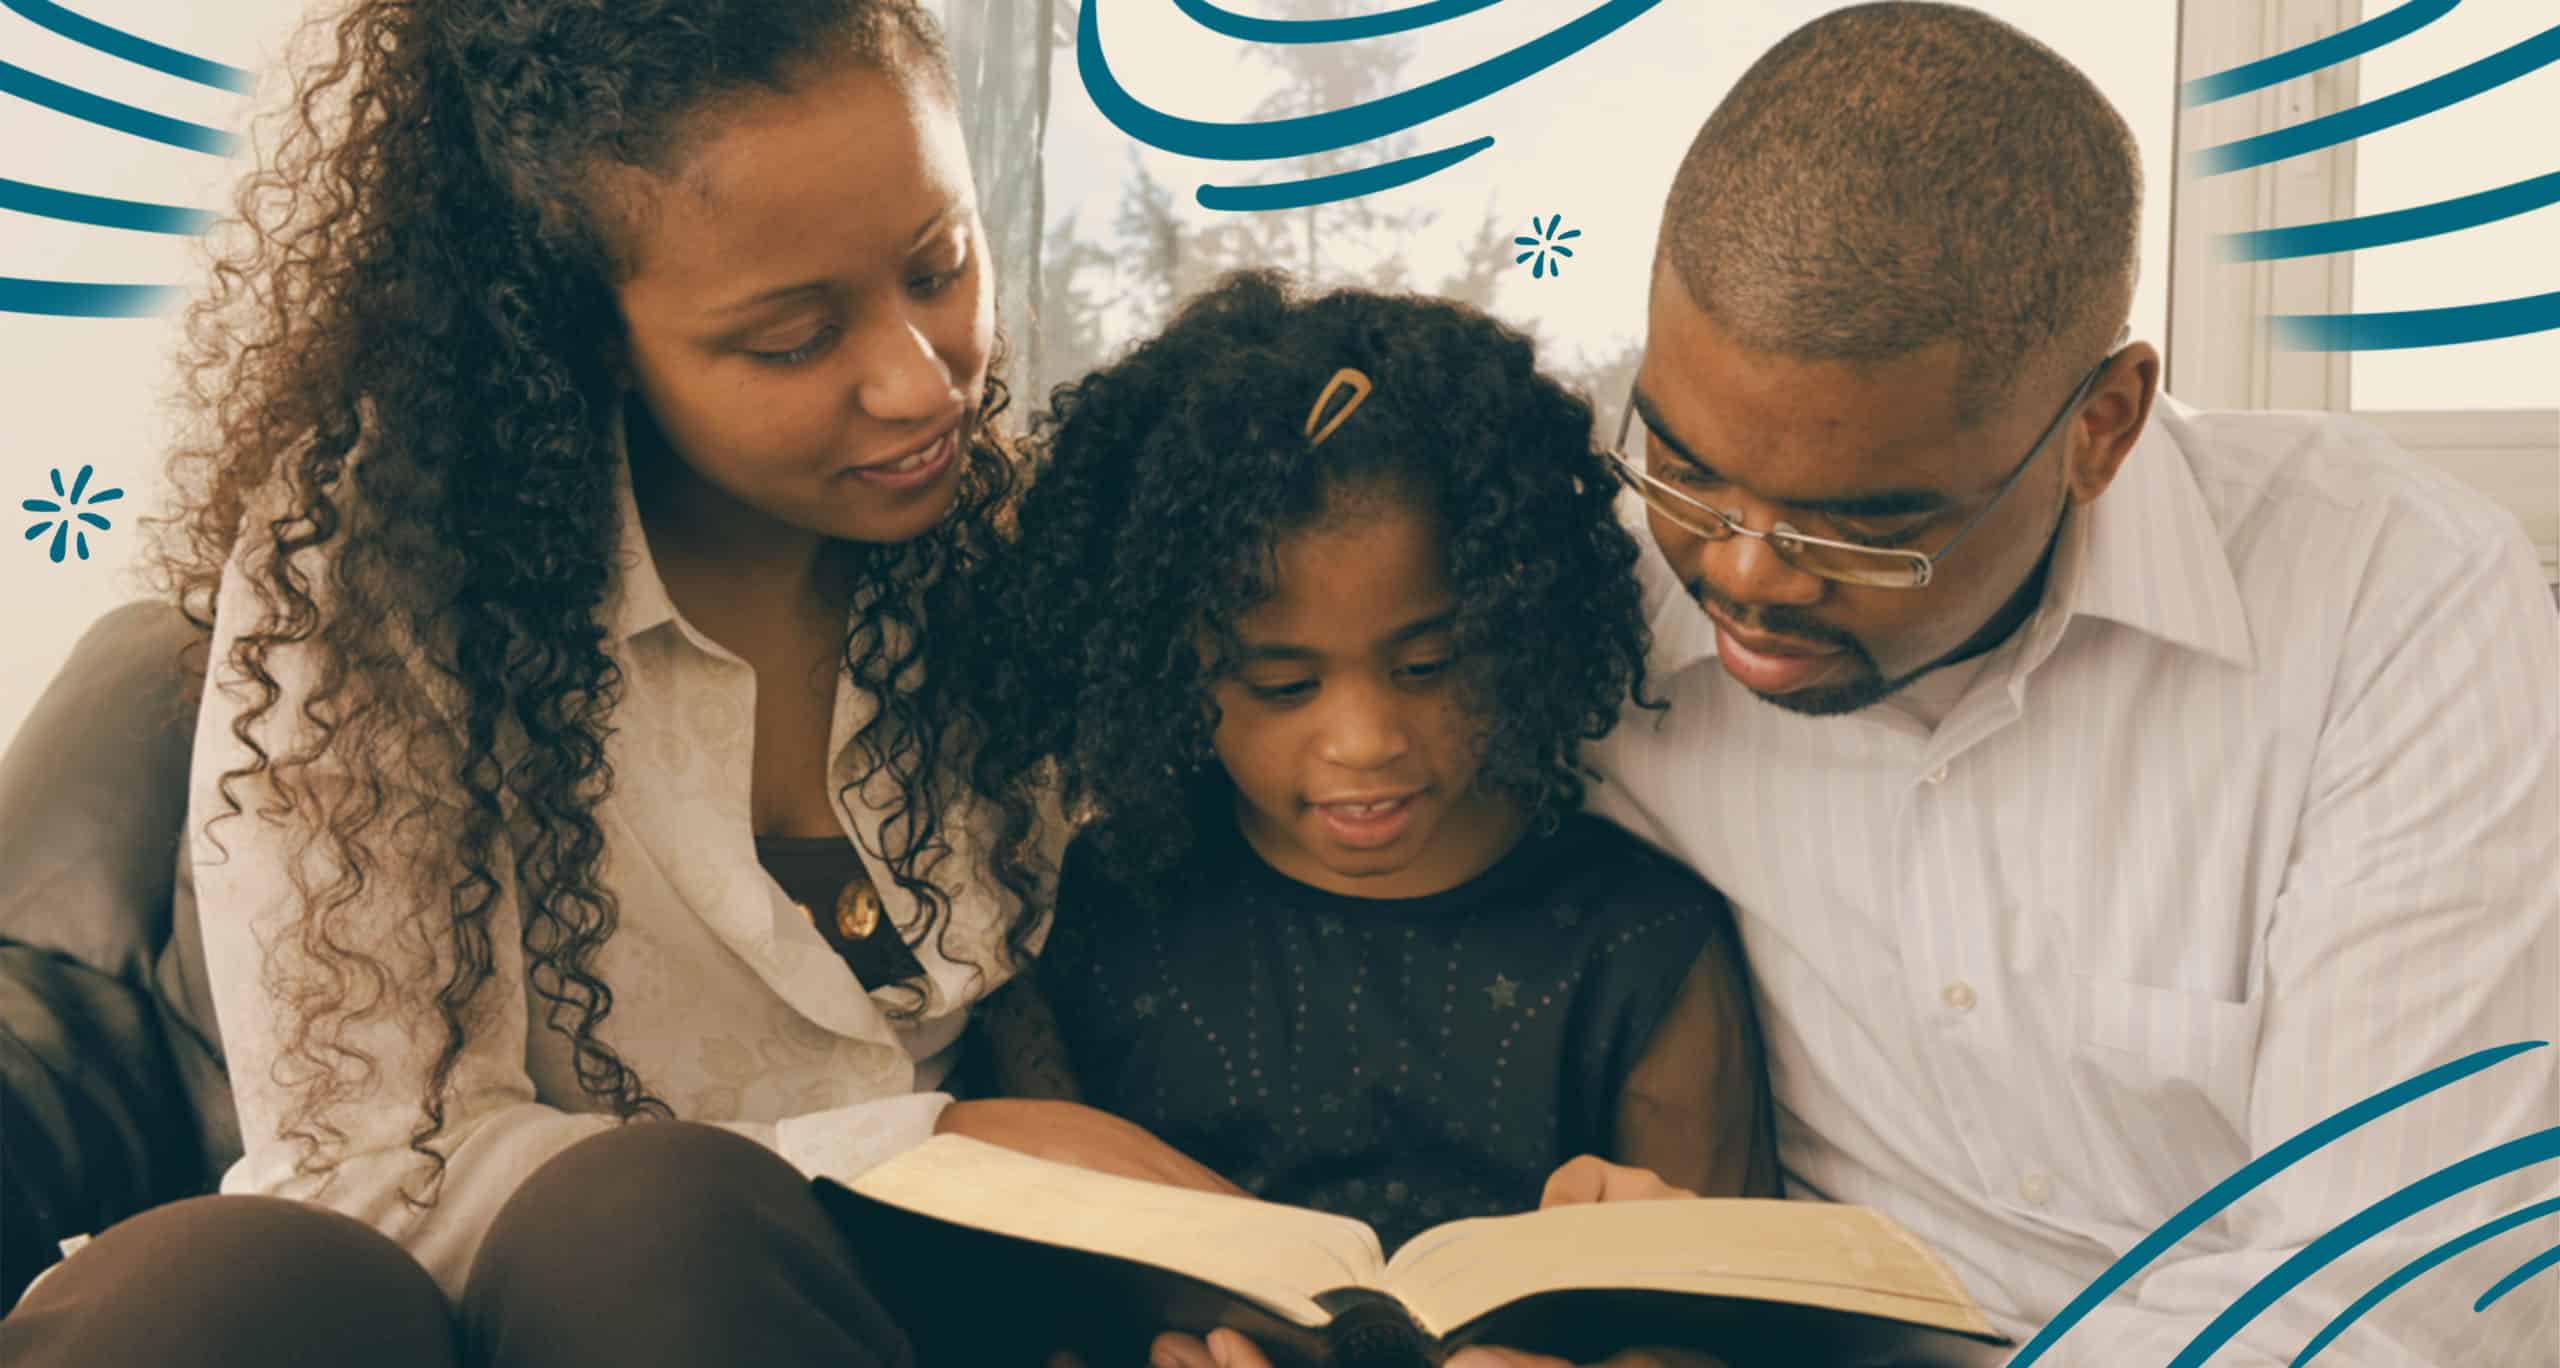 Mom and dad sitting on the couch with their young daughter and studying the Bible together